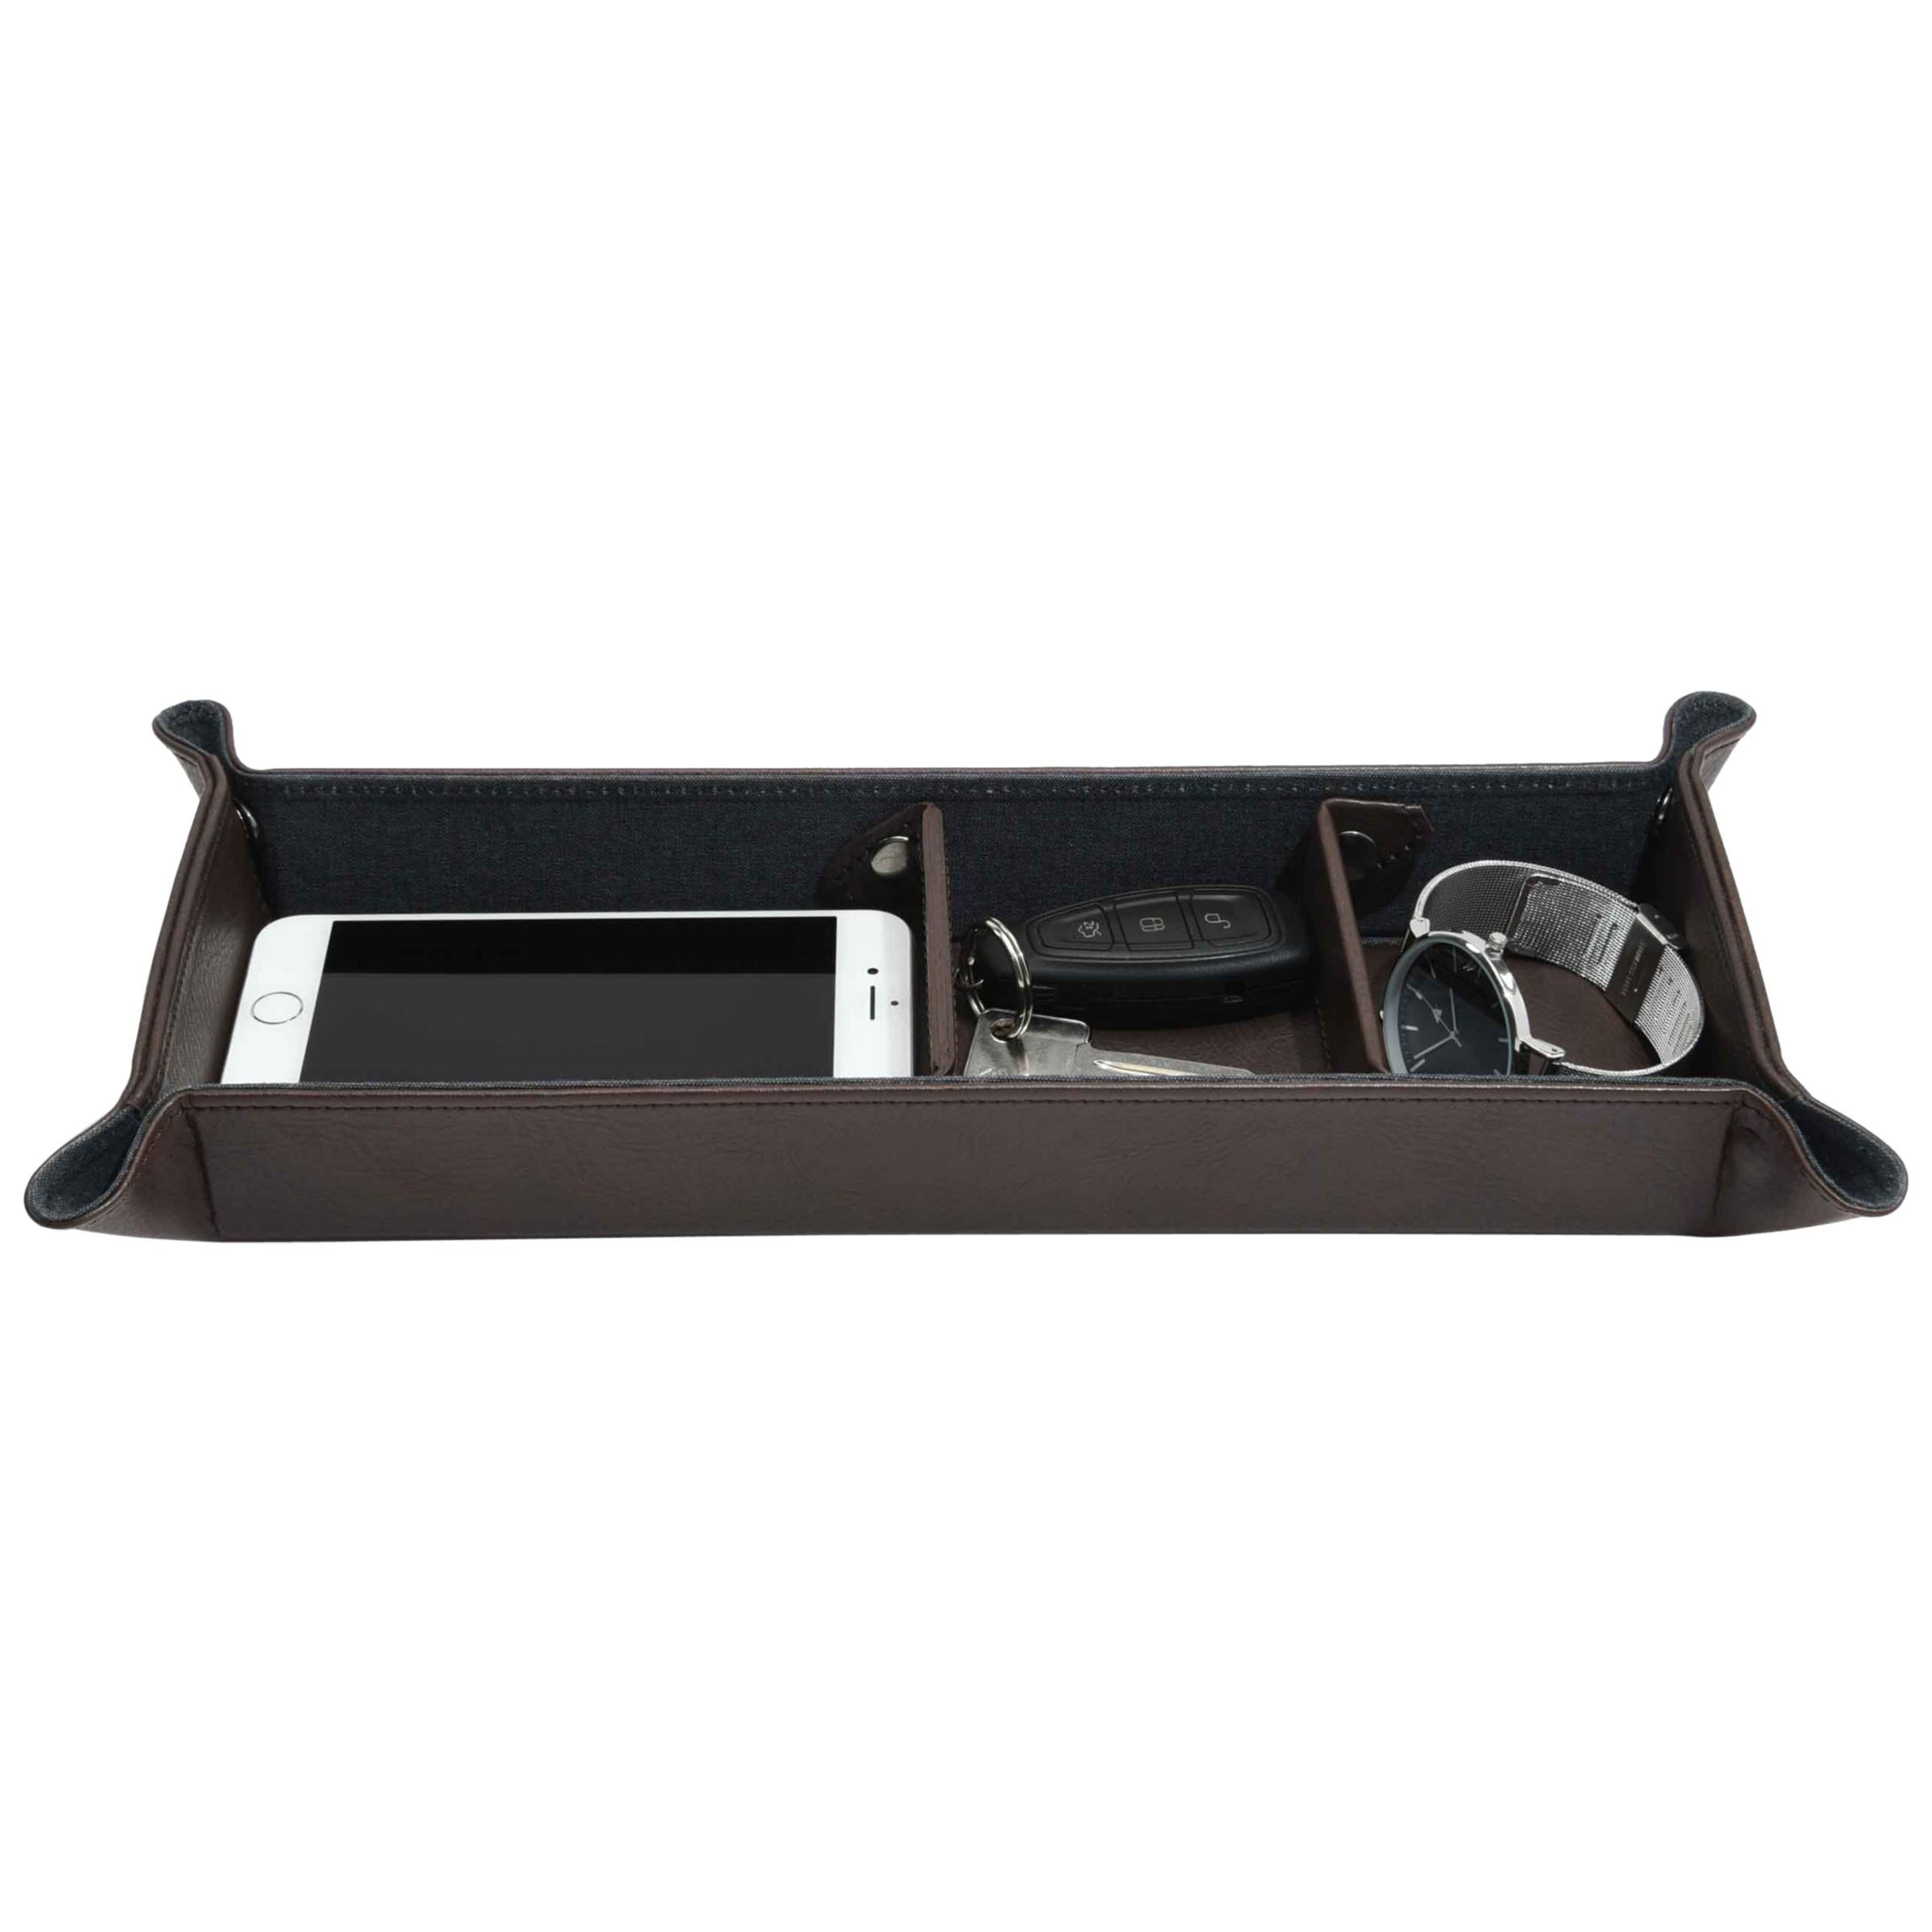 Stackers Large Catchall - image 1